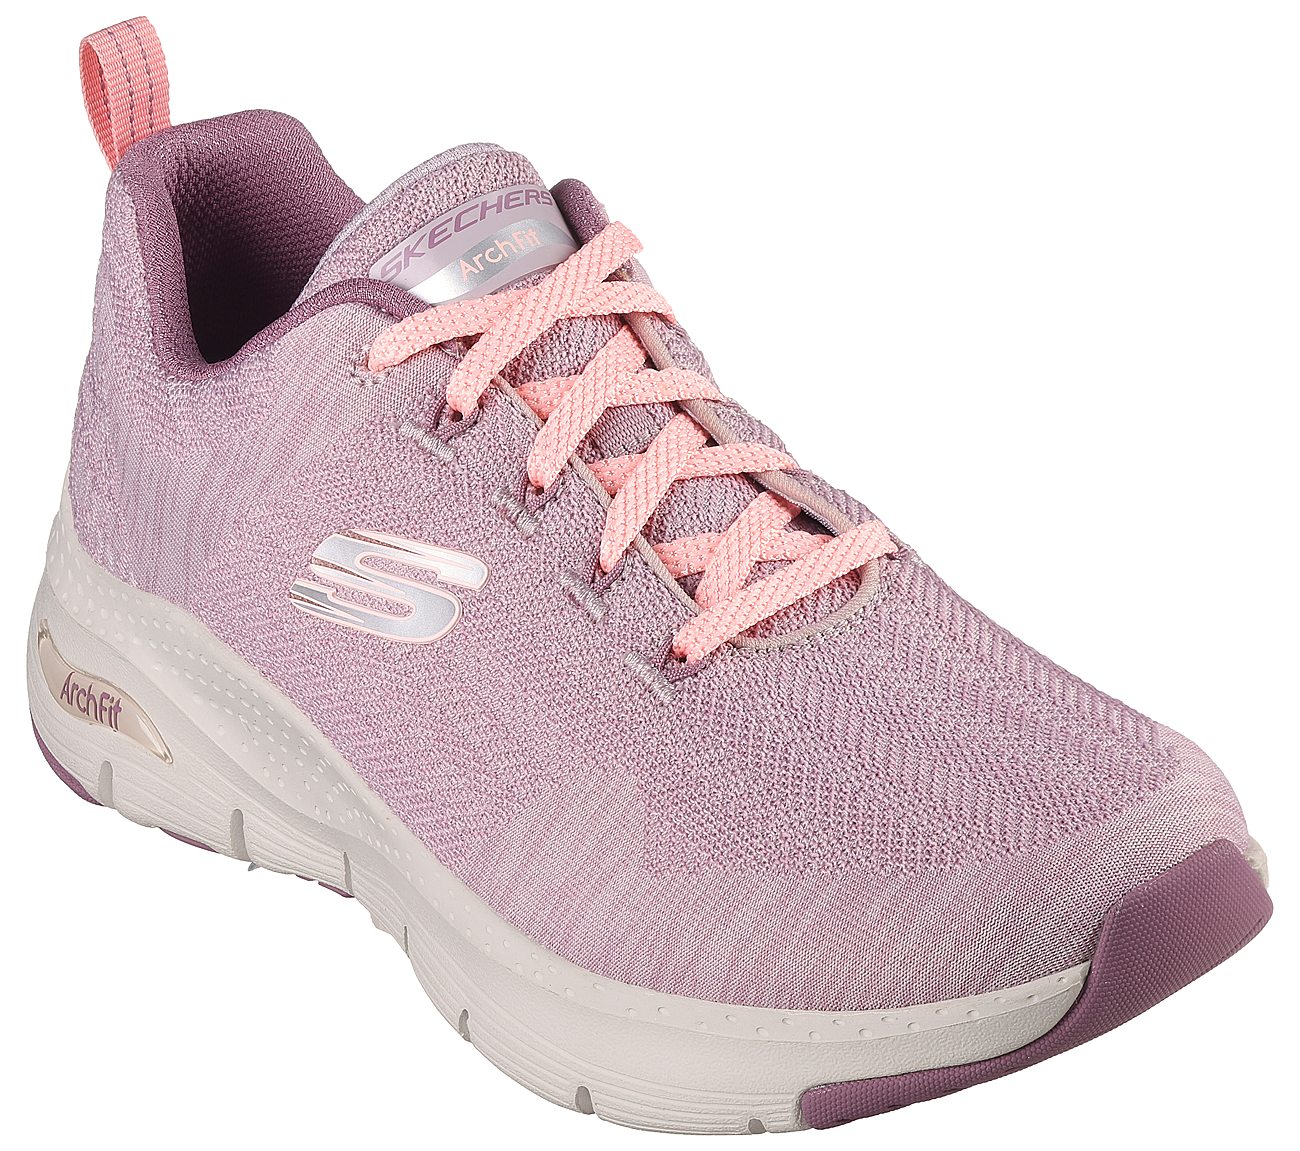 ARCH FIT-COMFY WAVE, MMAUVE Footwear Lateral View